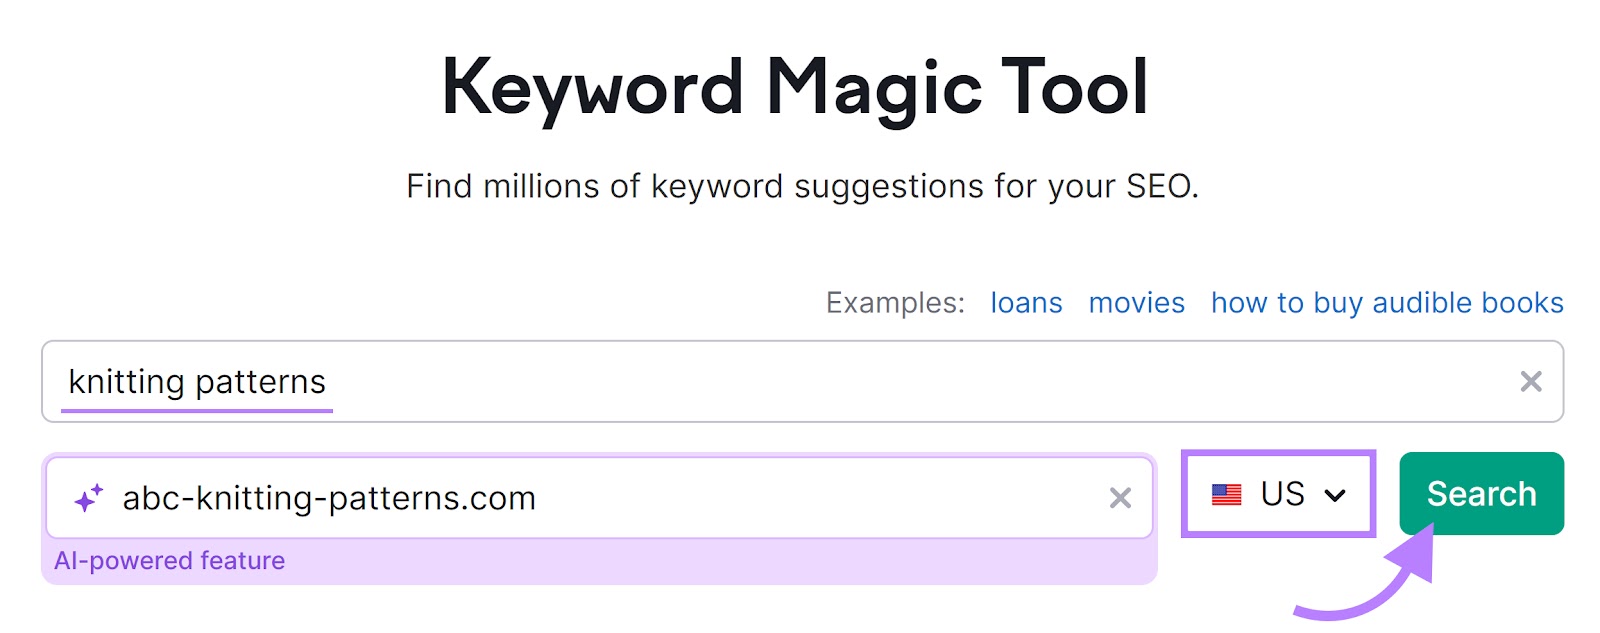 Keyword Magic Tool with "knitting patterns" in the search field and "abc-knitting-patterns.com" in the domain field.